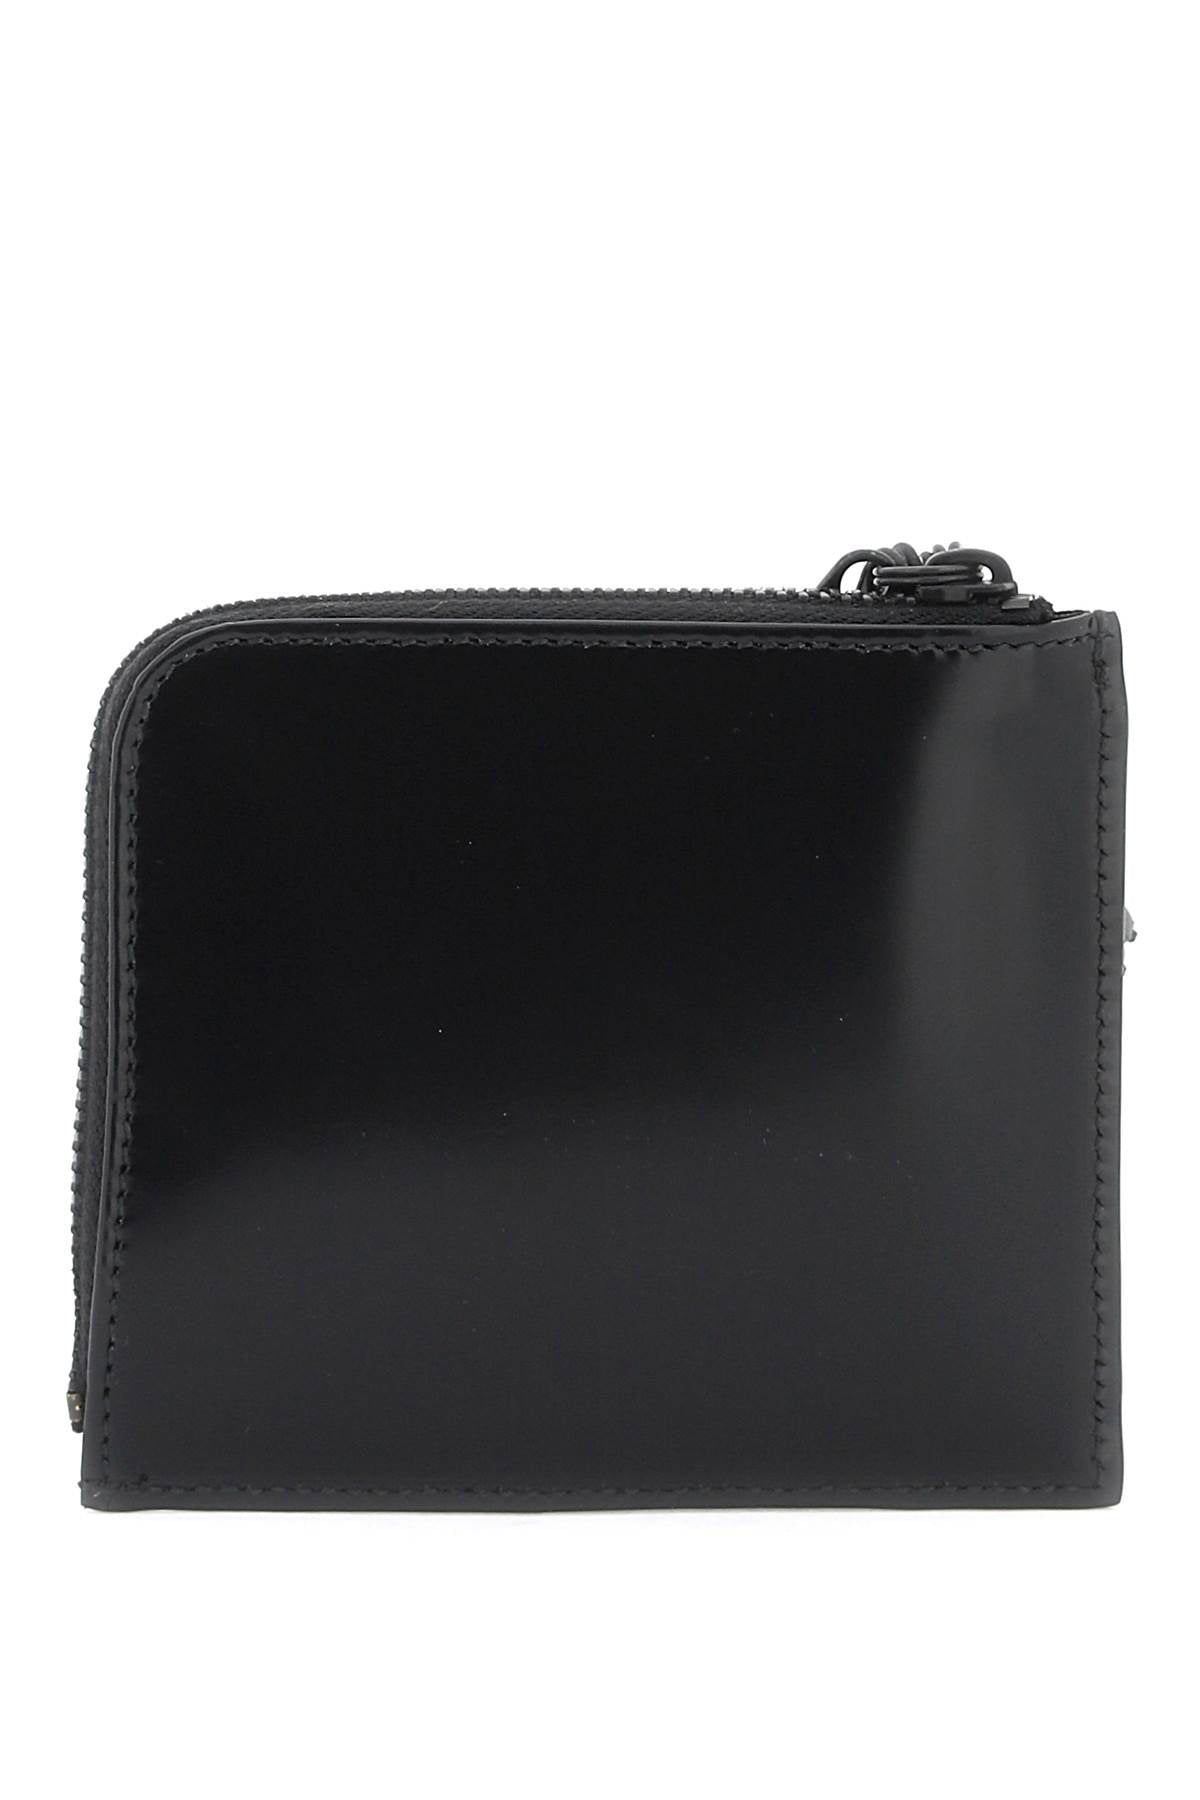 Comme Des Garcons Wallet Leather Multi Zip Wallet With   Black